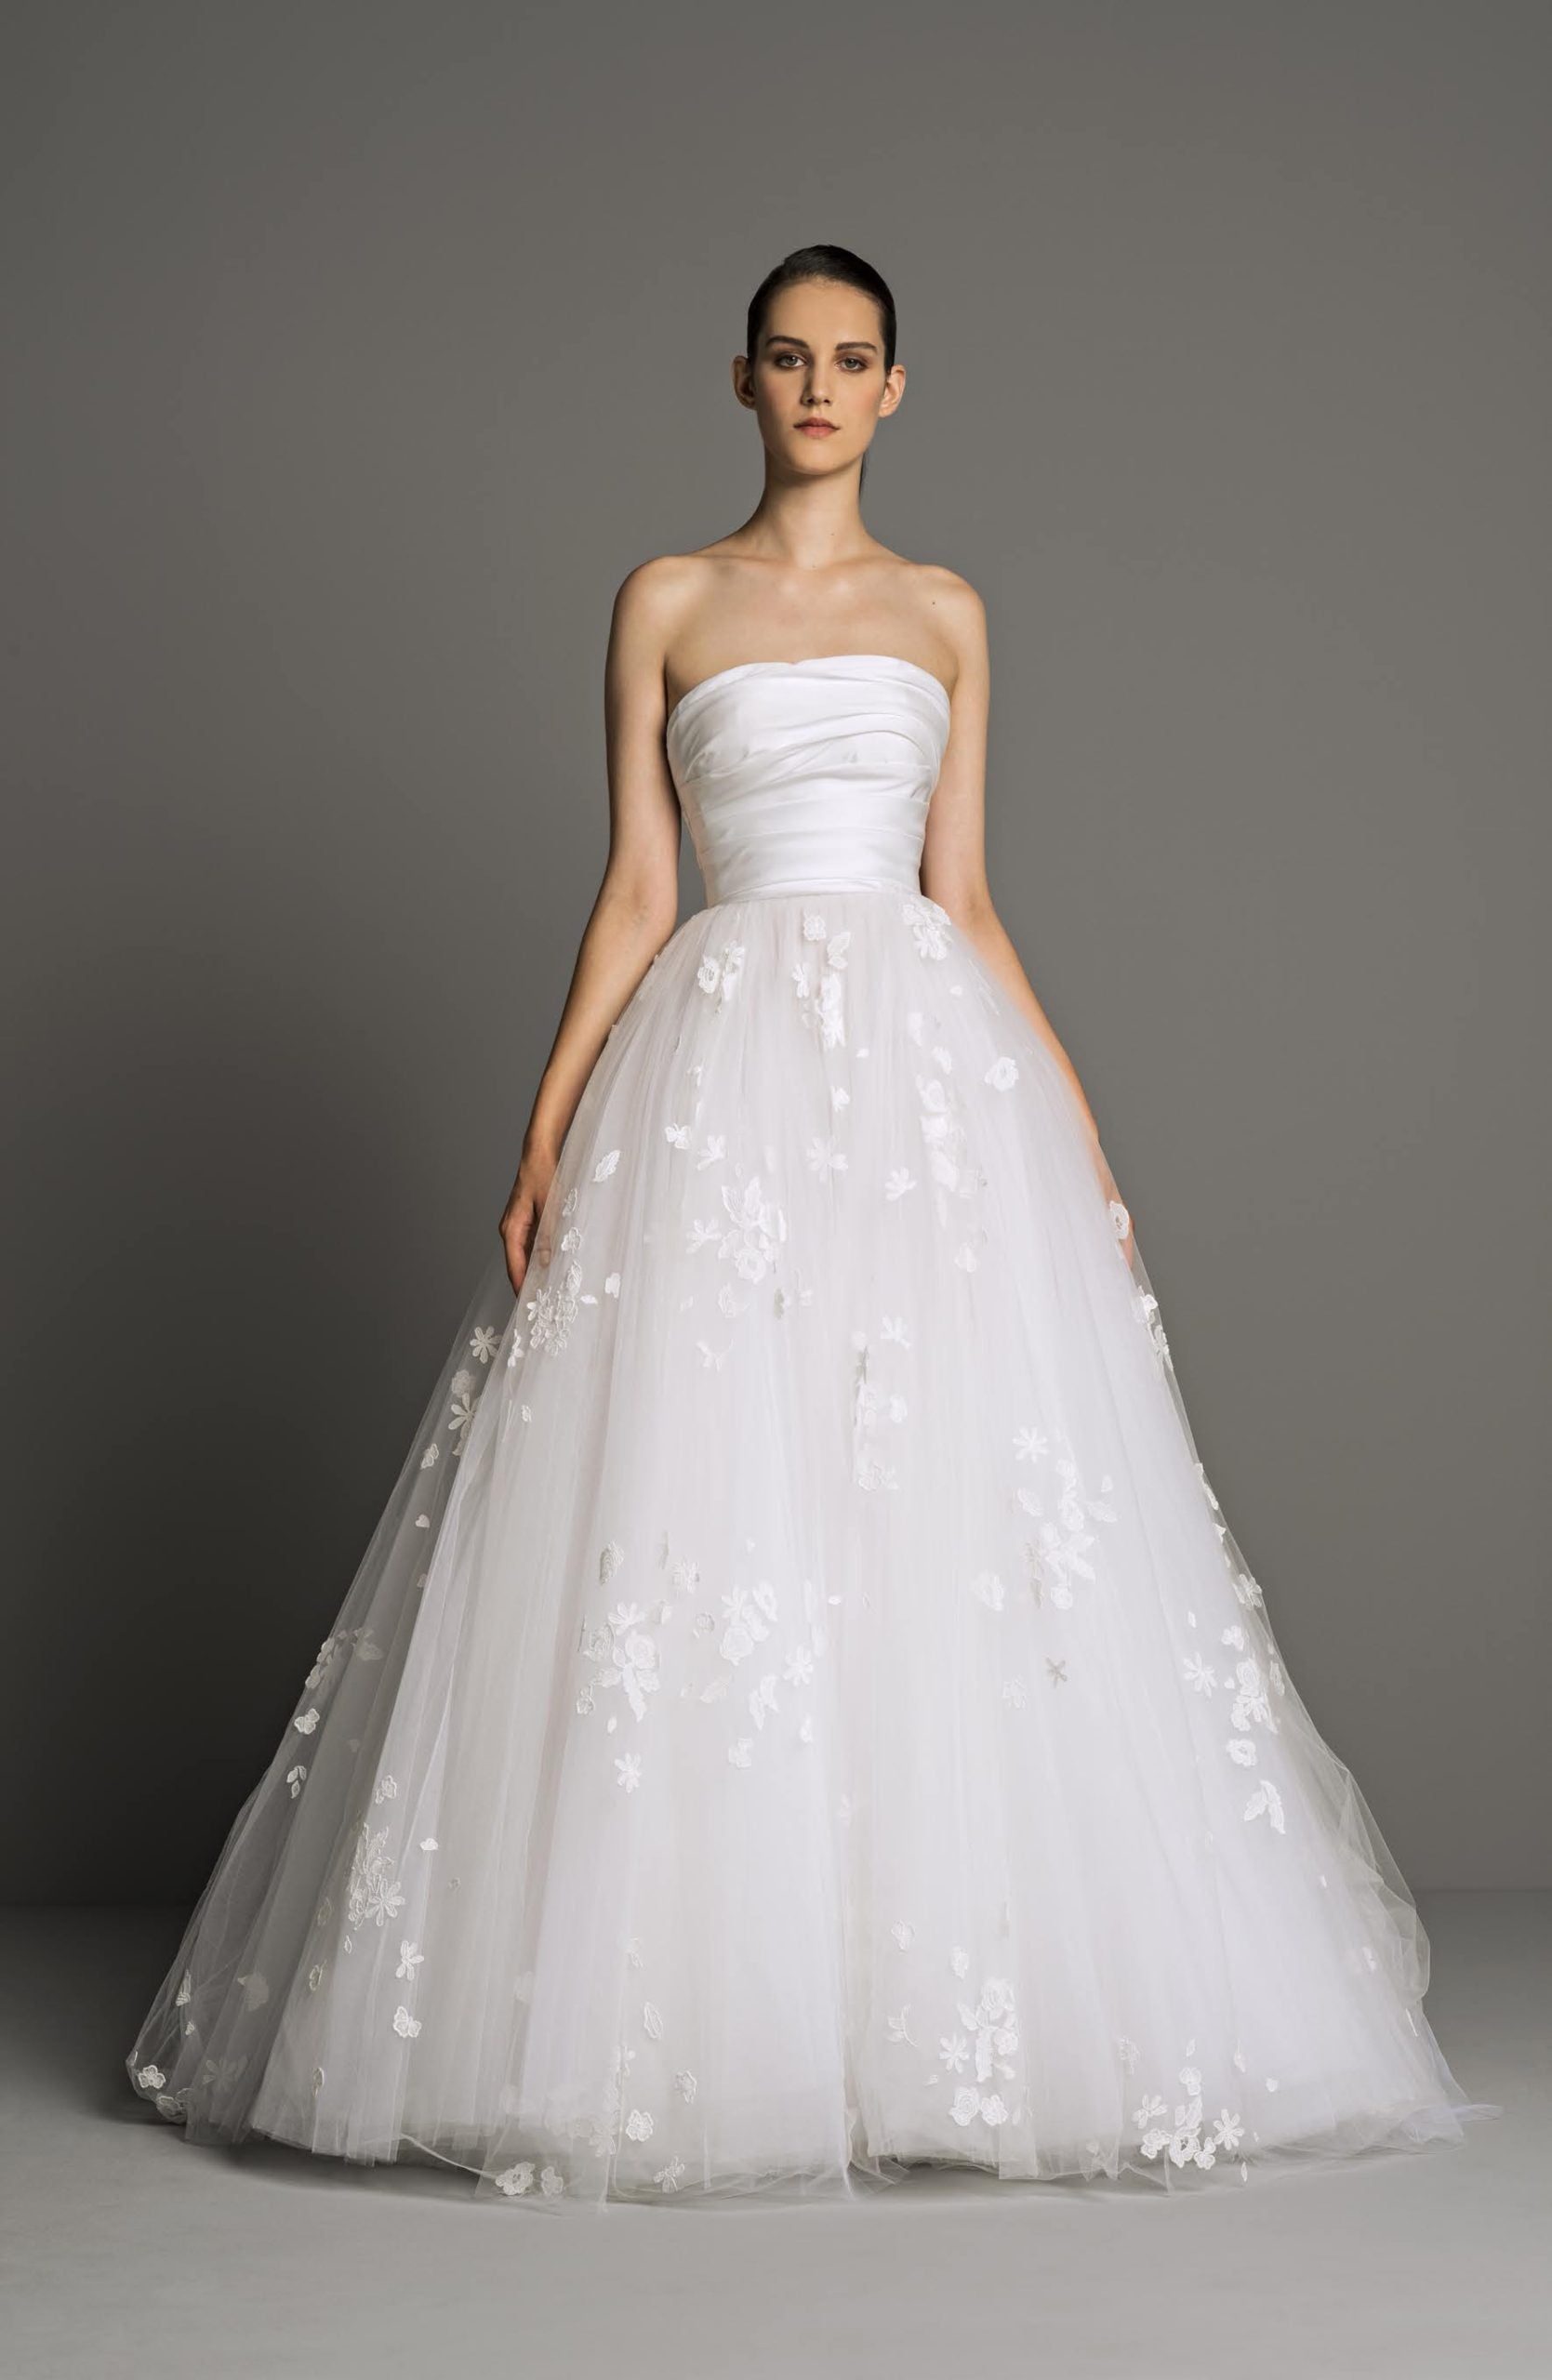 Strapless Ball Gown Wedding Dress With Tulle Skirt by Peter Langner - Image 1